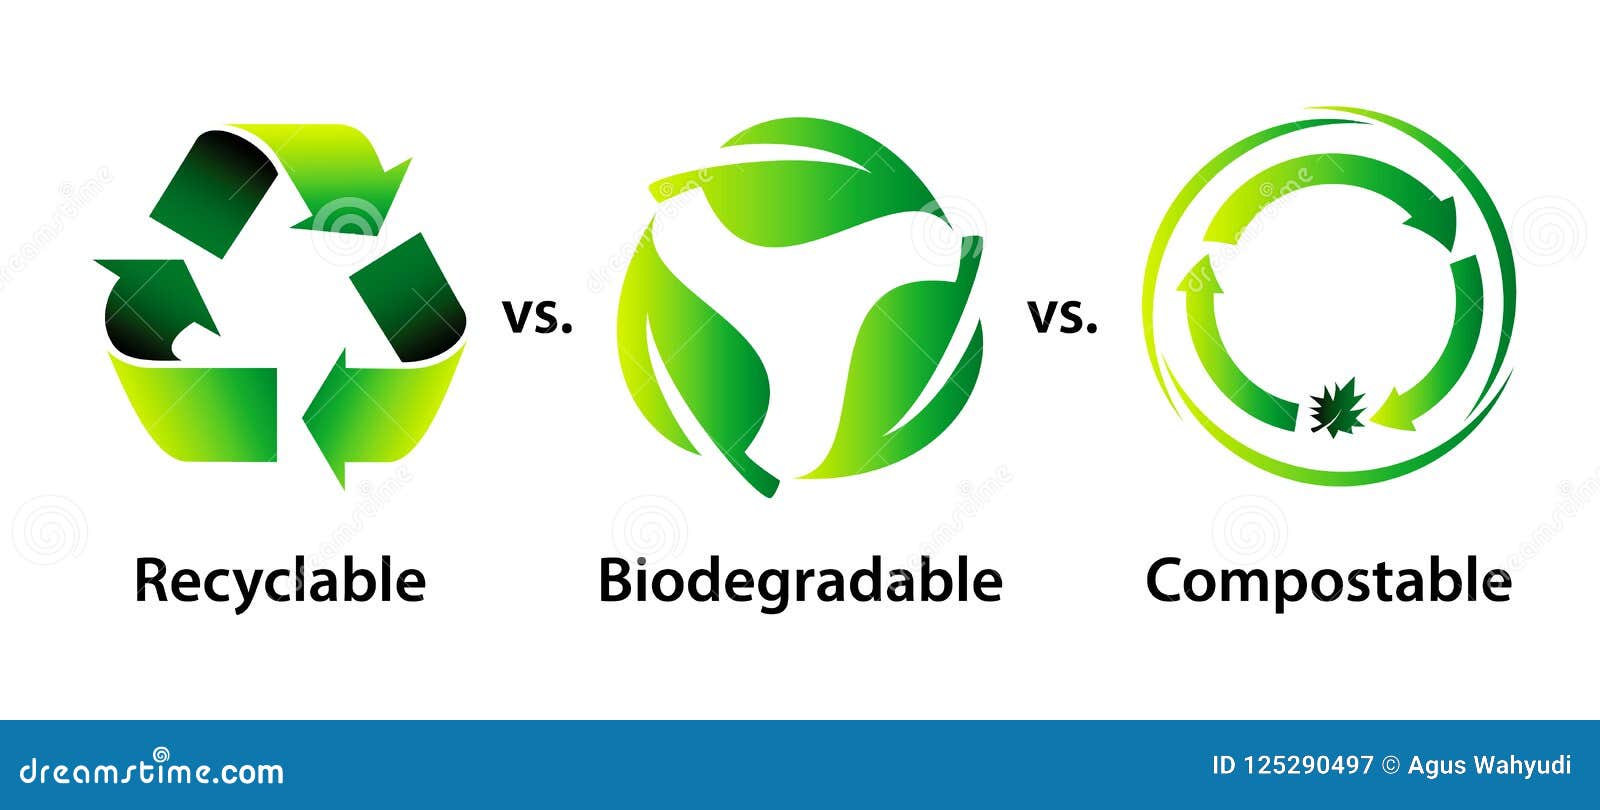 recycle, biodegradable, and compostable